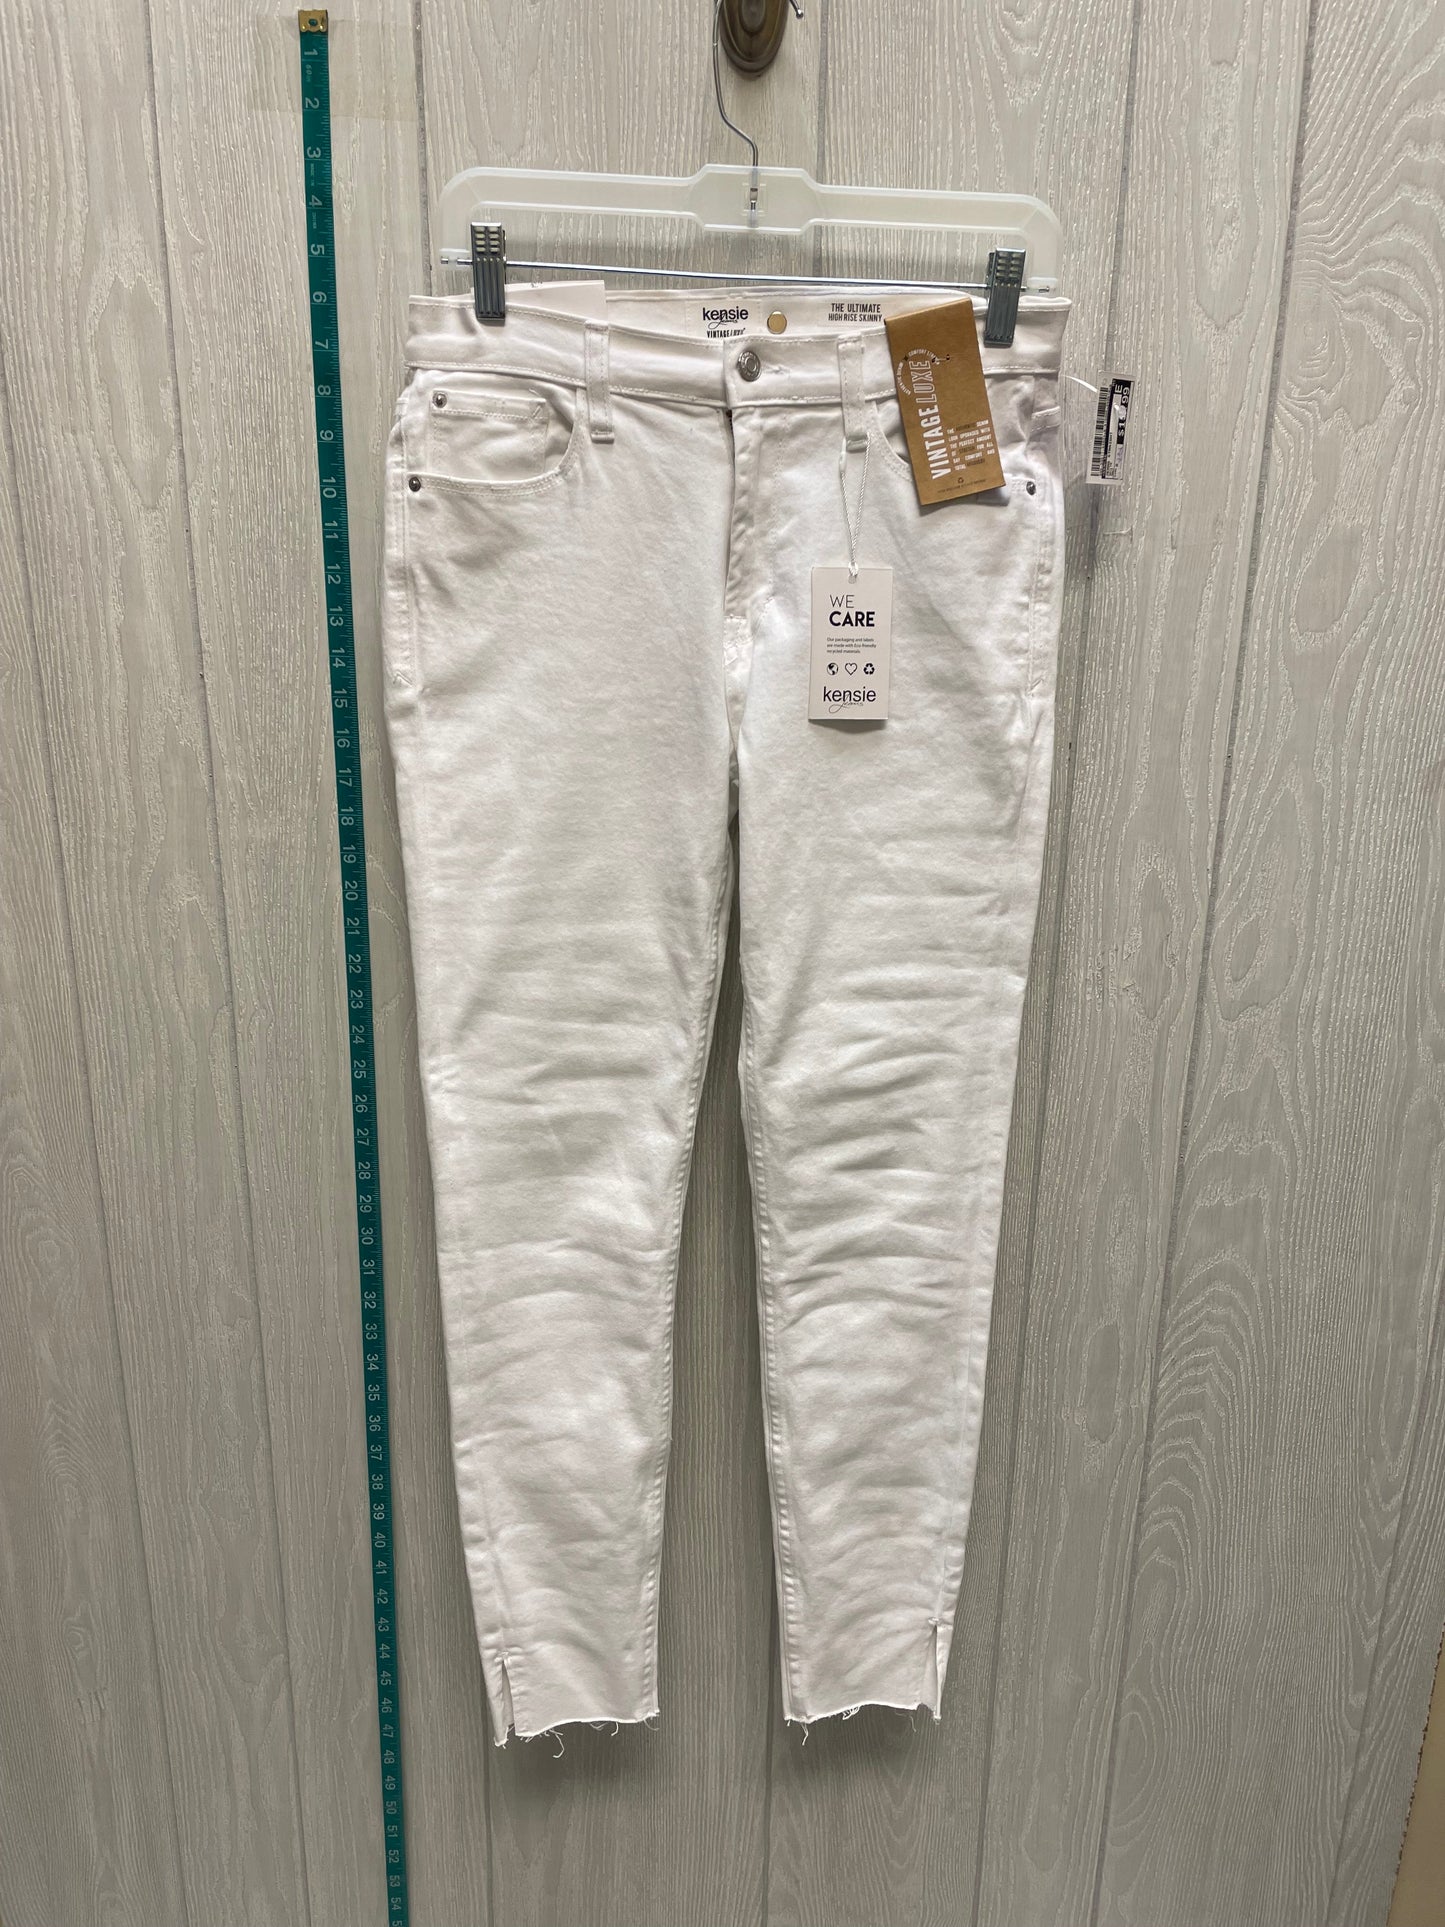 White Jeans Straight Kensie, Size 2